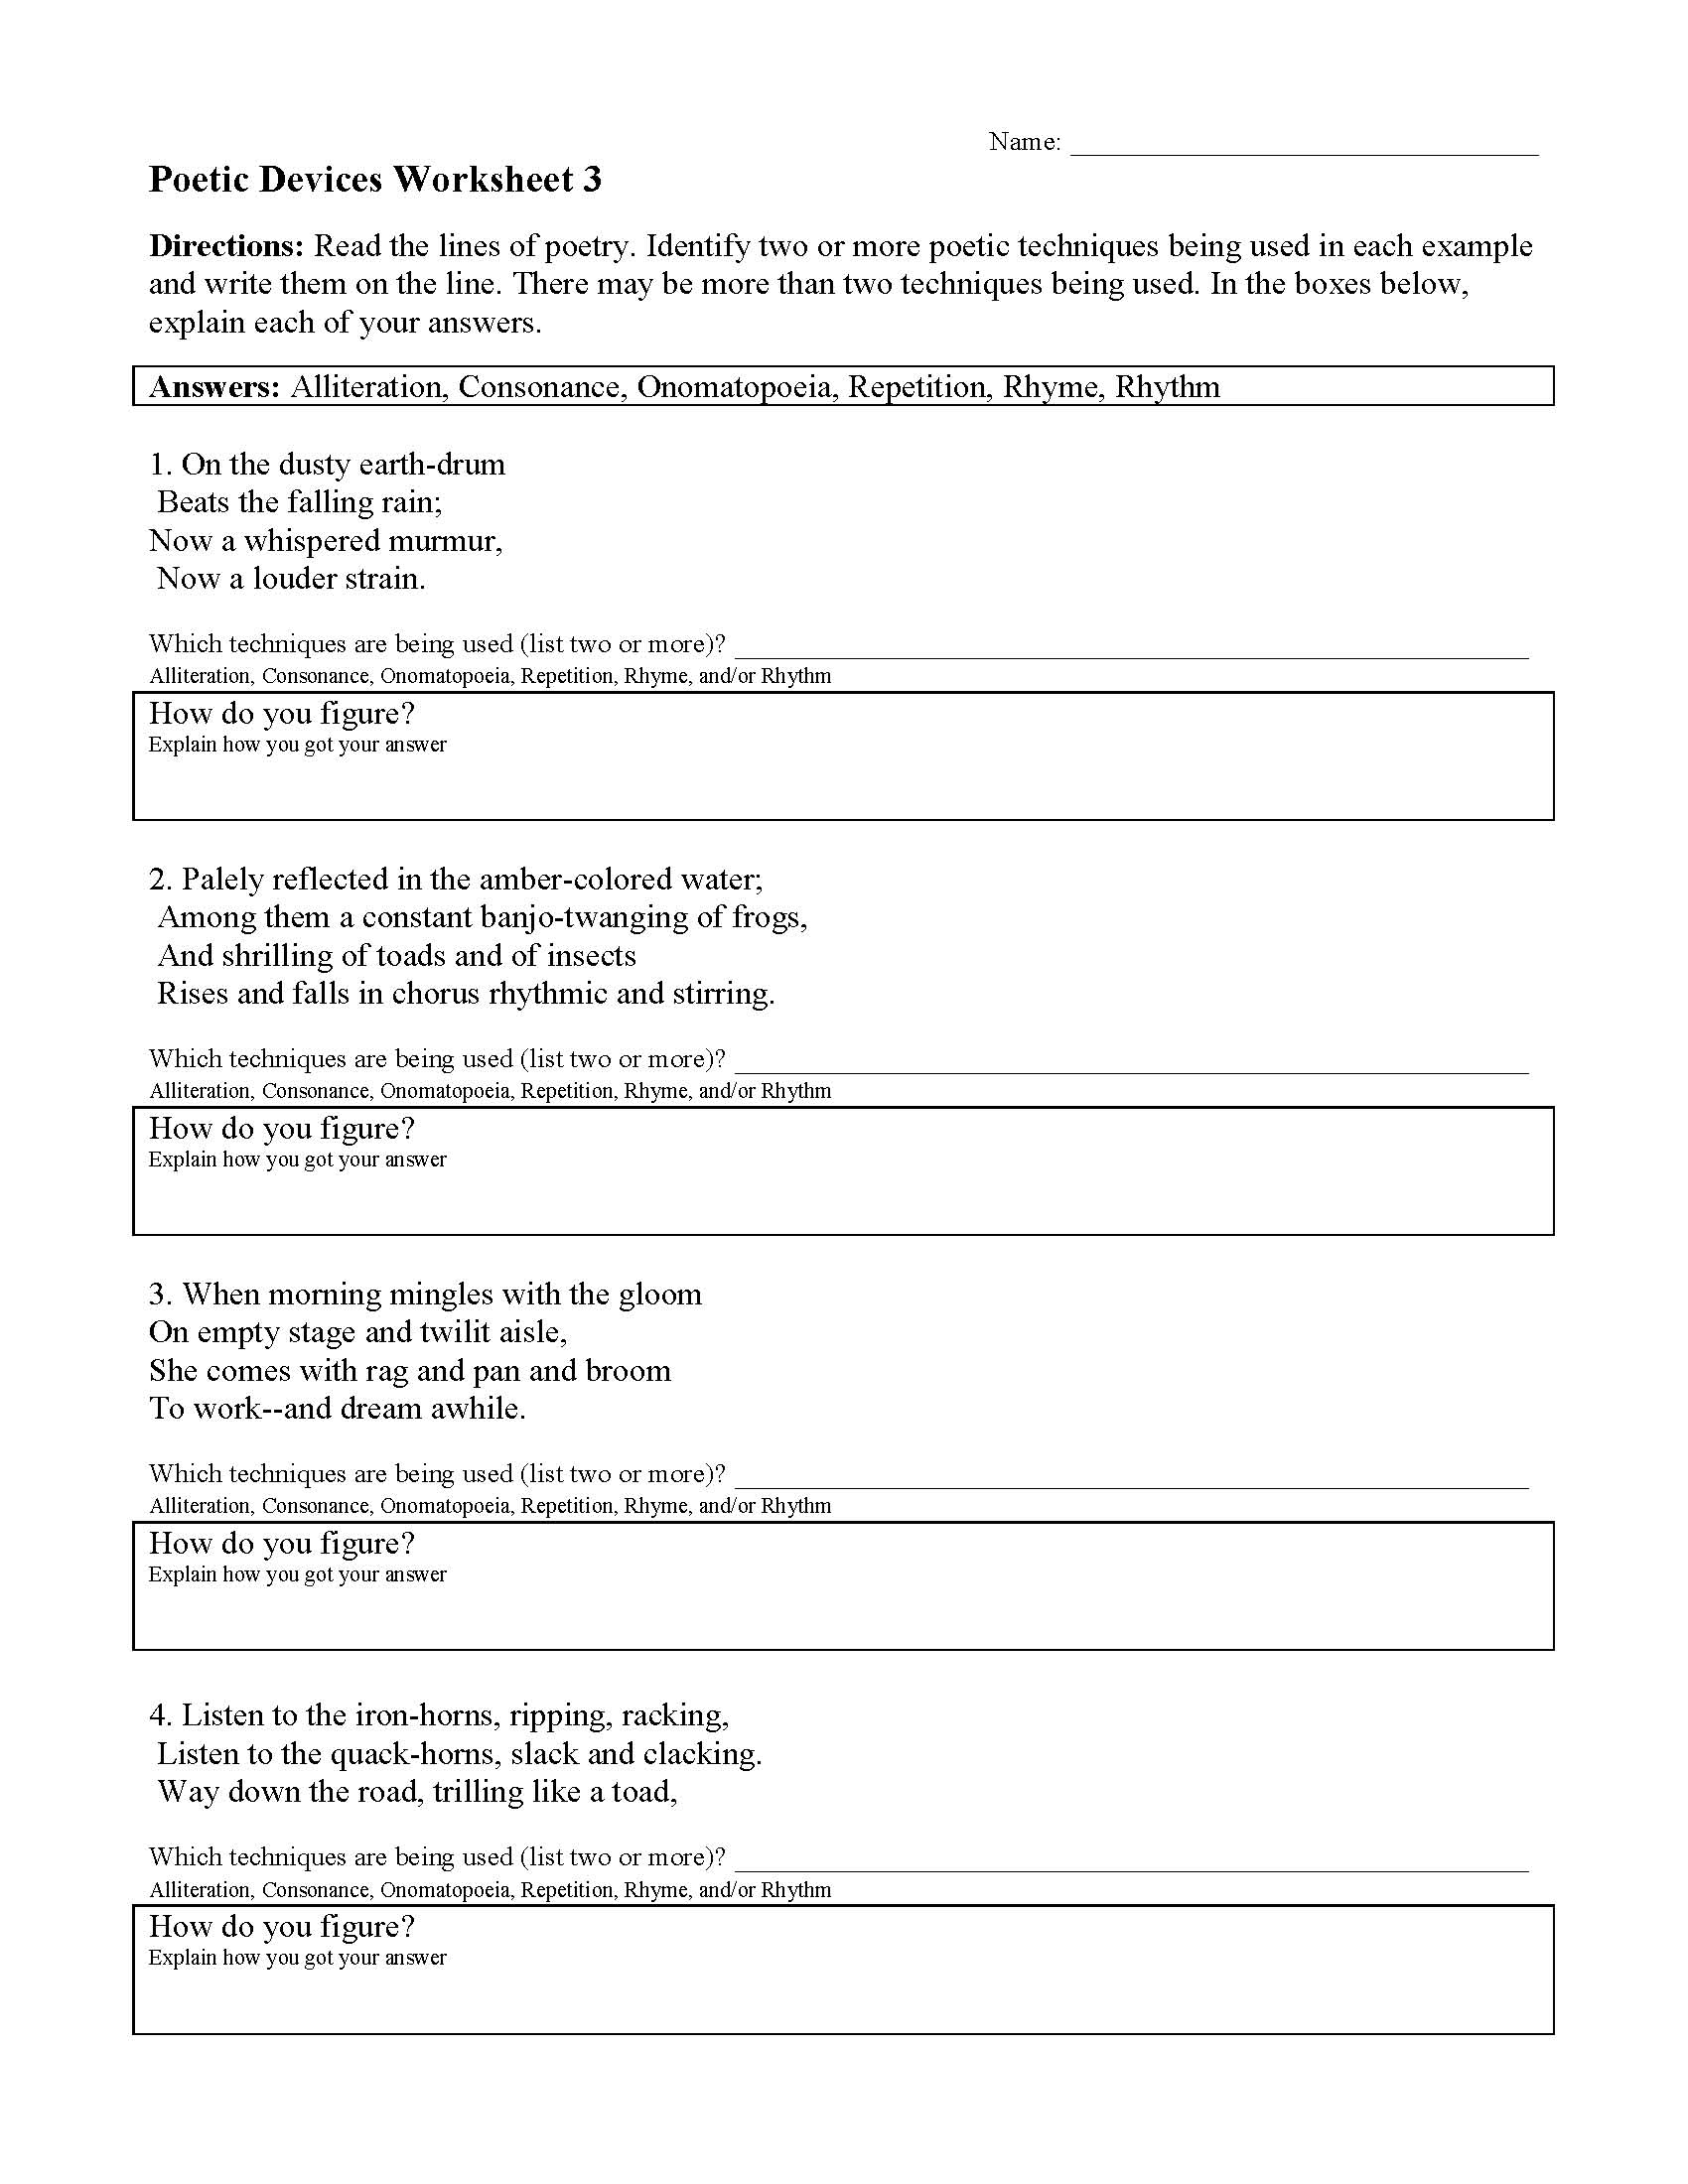 identifying-poetic-devices-worksheet-1-answers